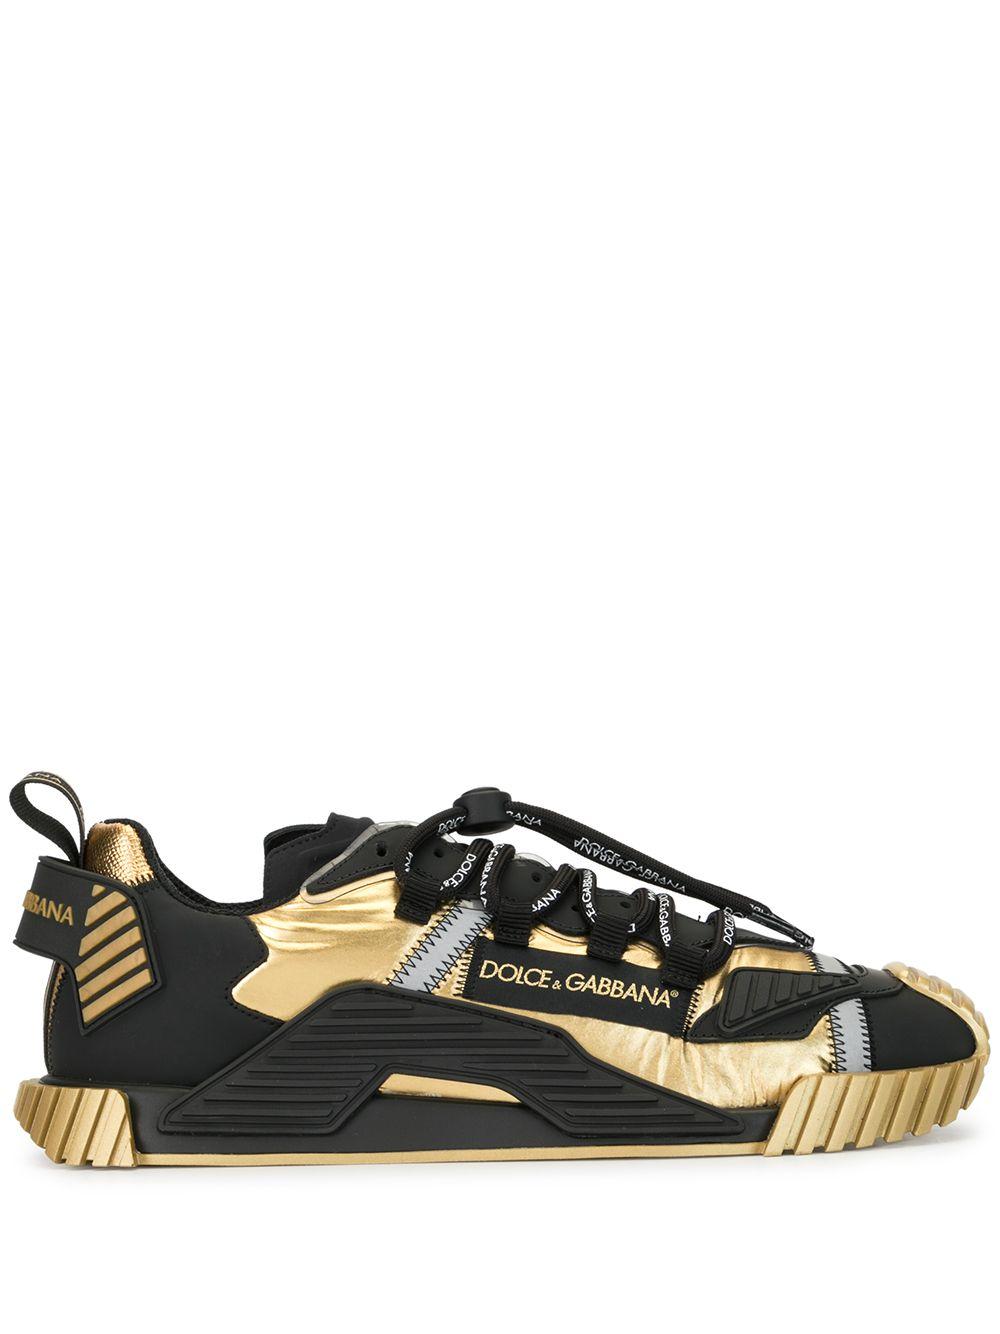 Dolce & Gabbana Ns1 Sneakers In Mixed Materials in Black for Men | Lyst UK